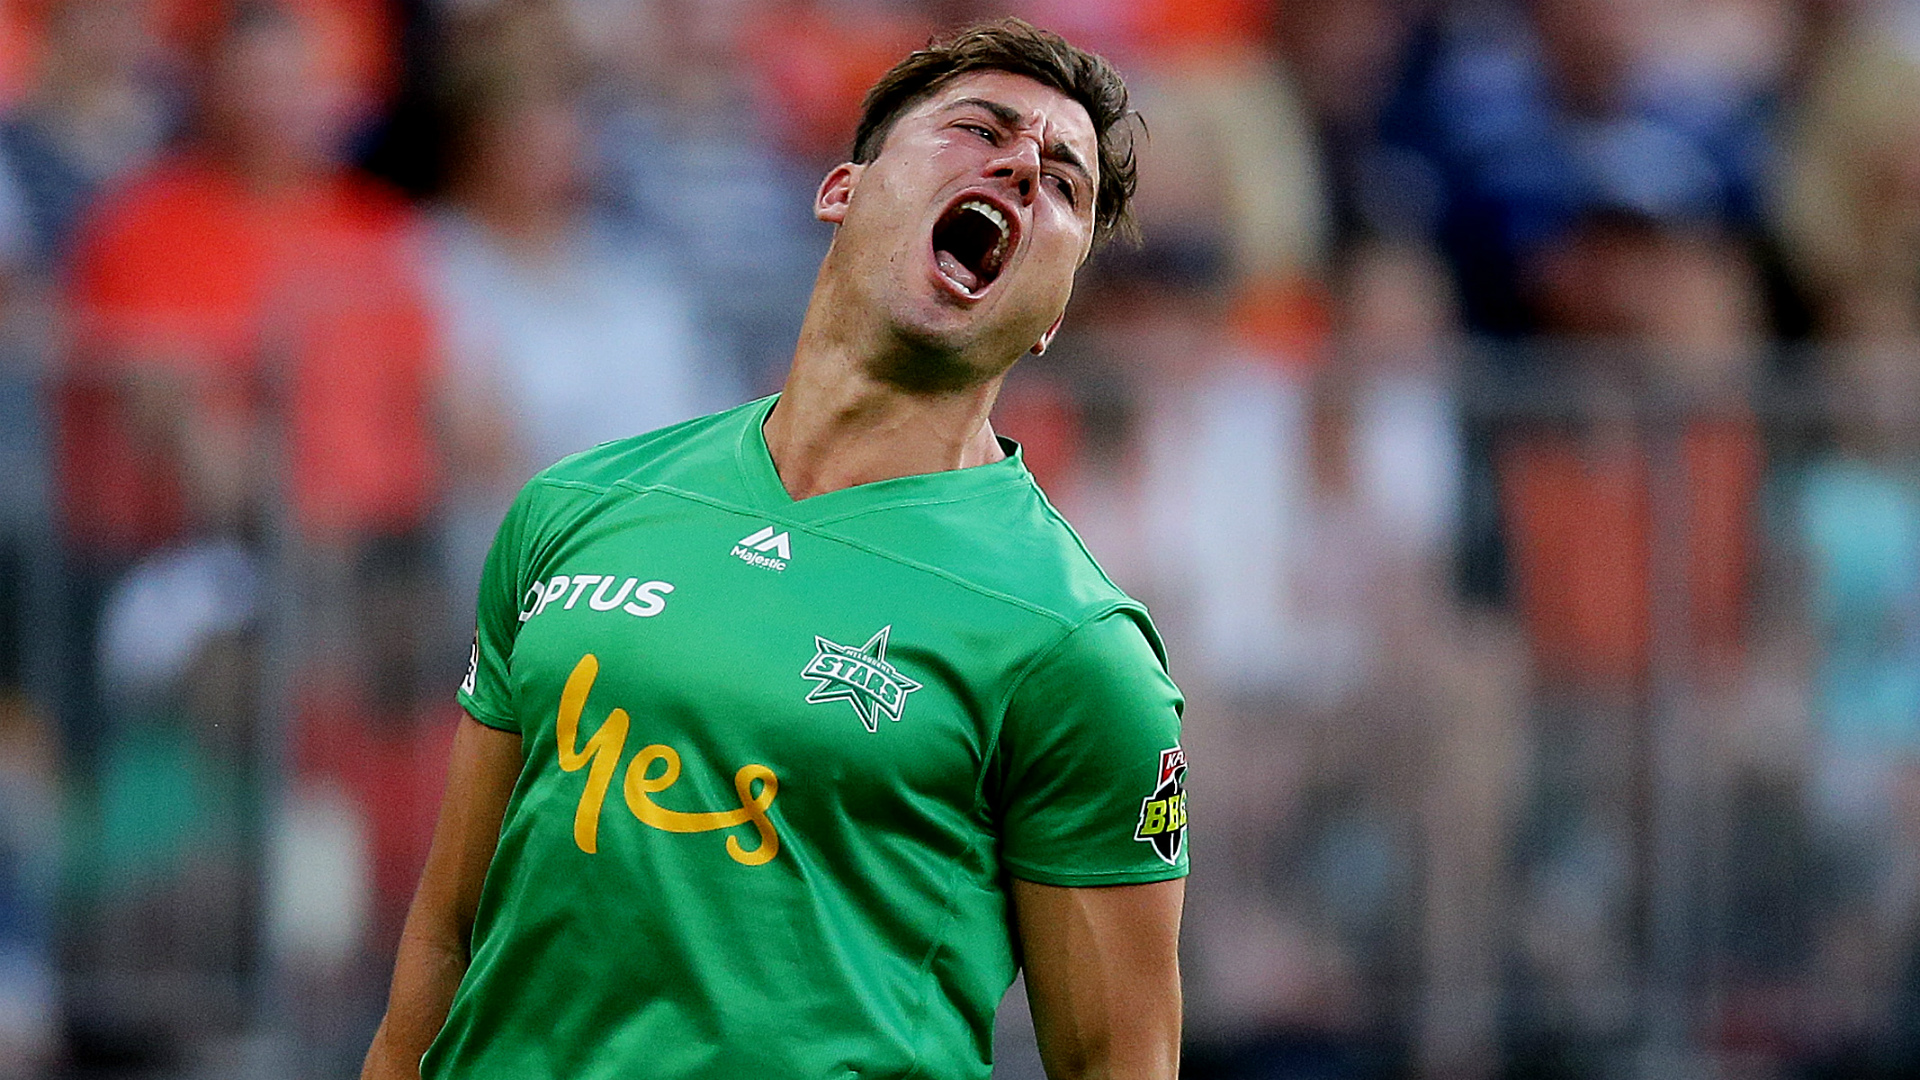 Marcus Stoinis hit the winning runs for Melbourne Stars after Perth Scorchers had collapsed to 86 all out in the Big Bash League.